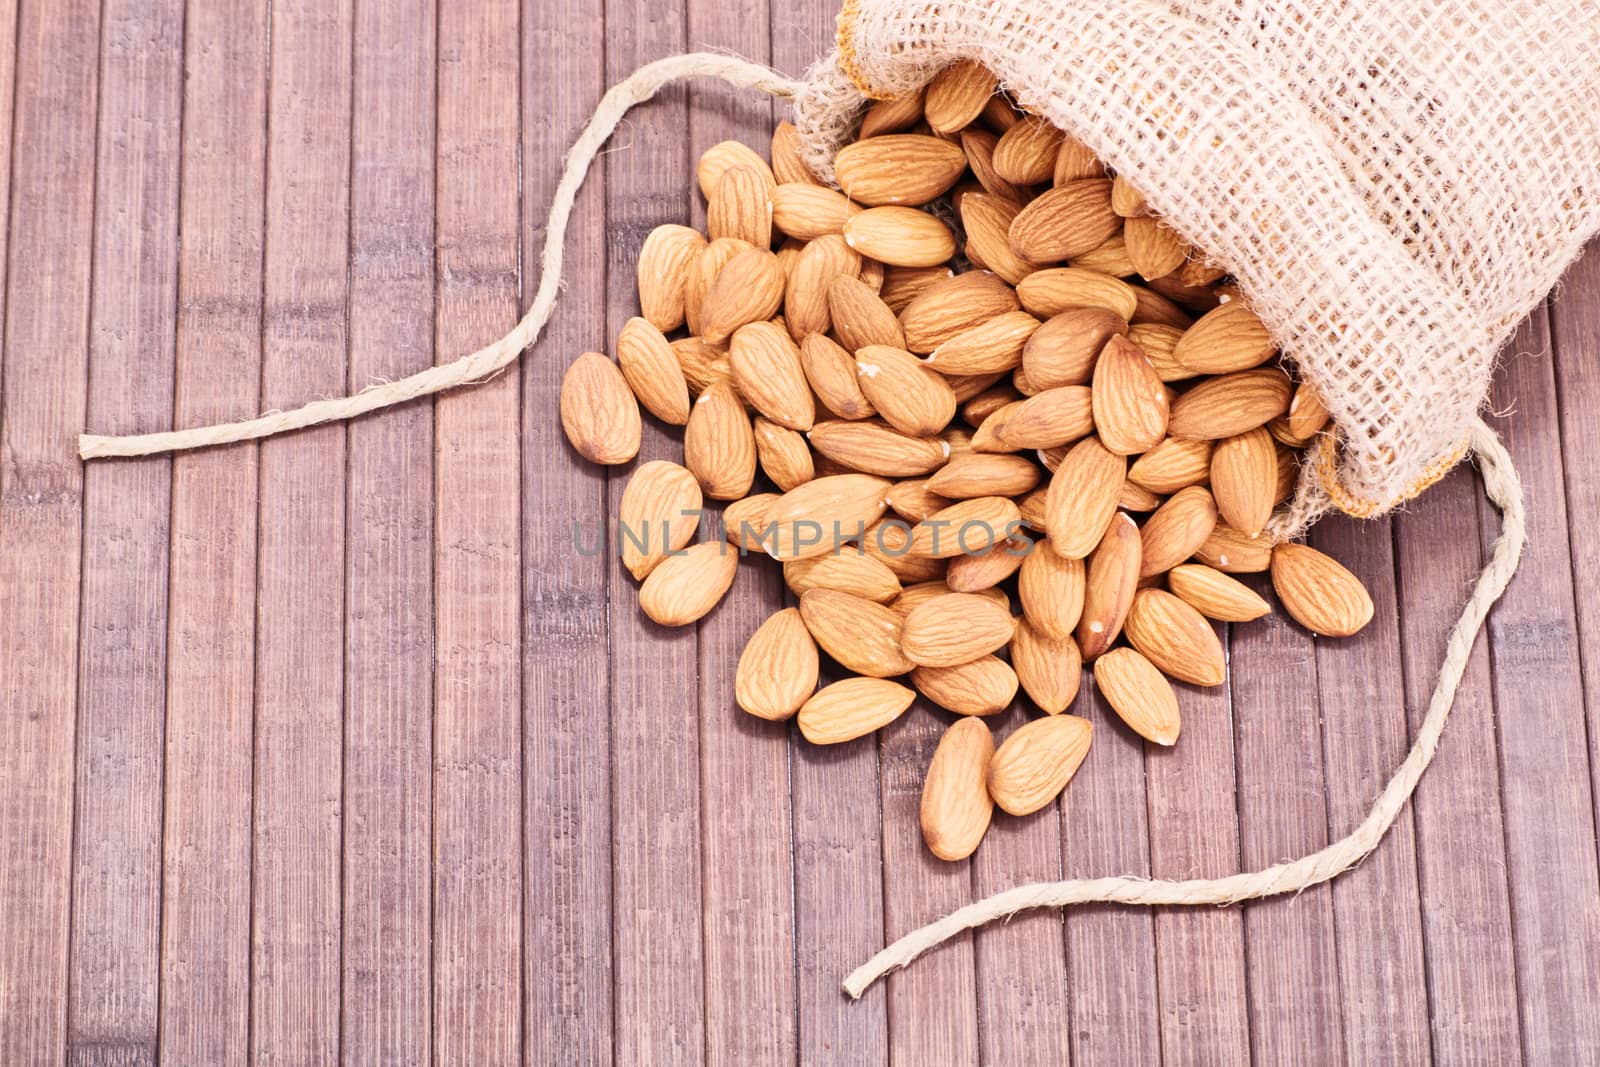 Spilled almonds on wooden background by Mendelex